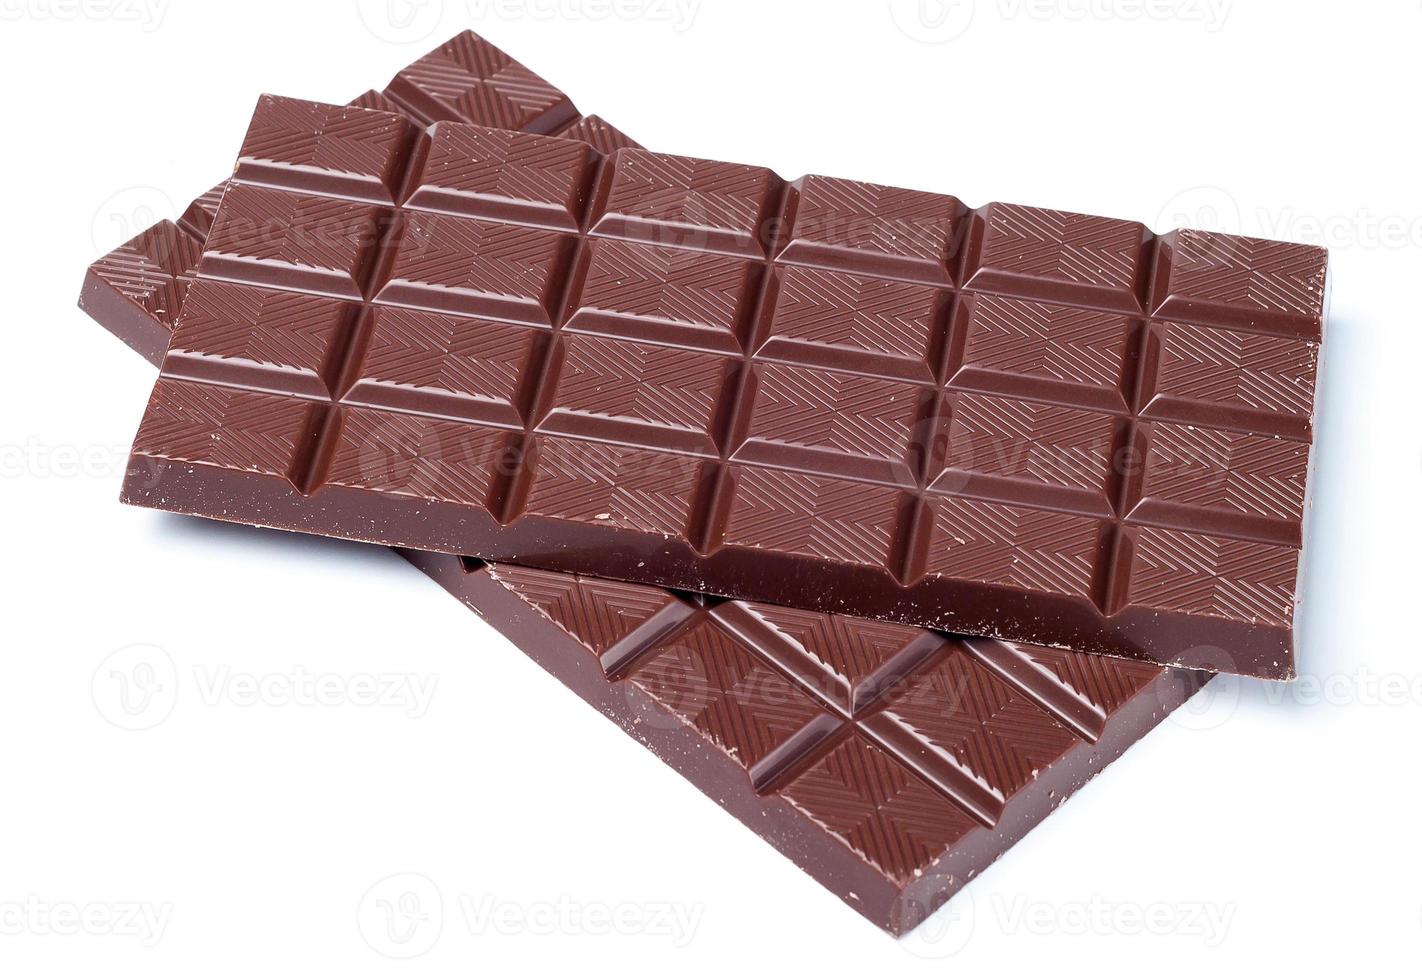 donkere chocoladereep op witte achtergrond foto